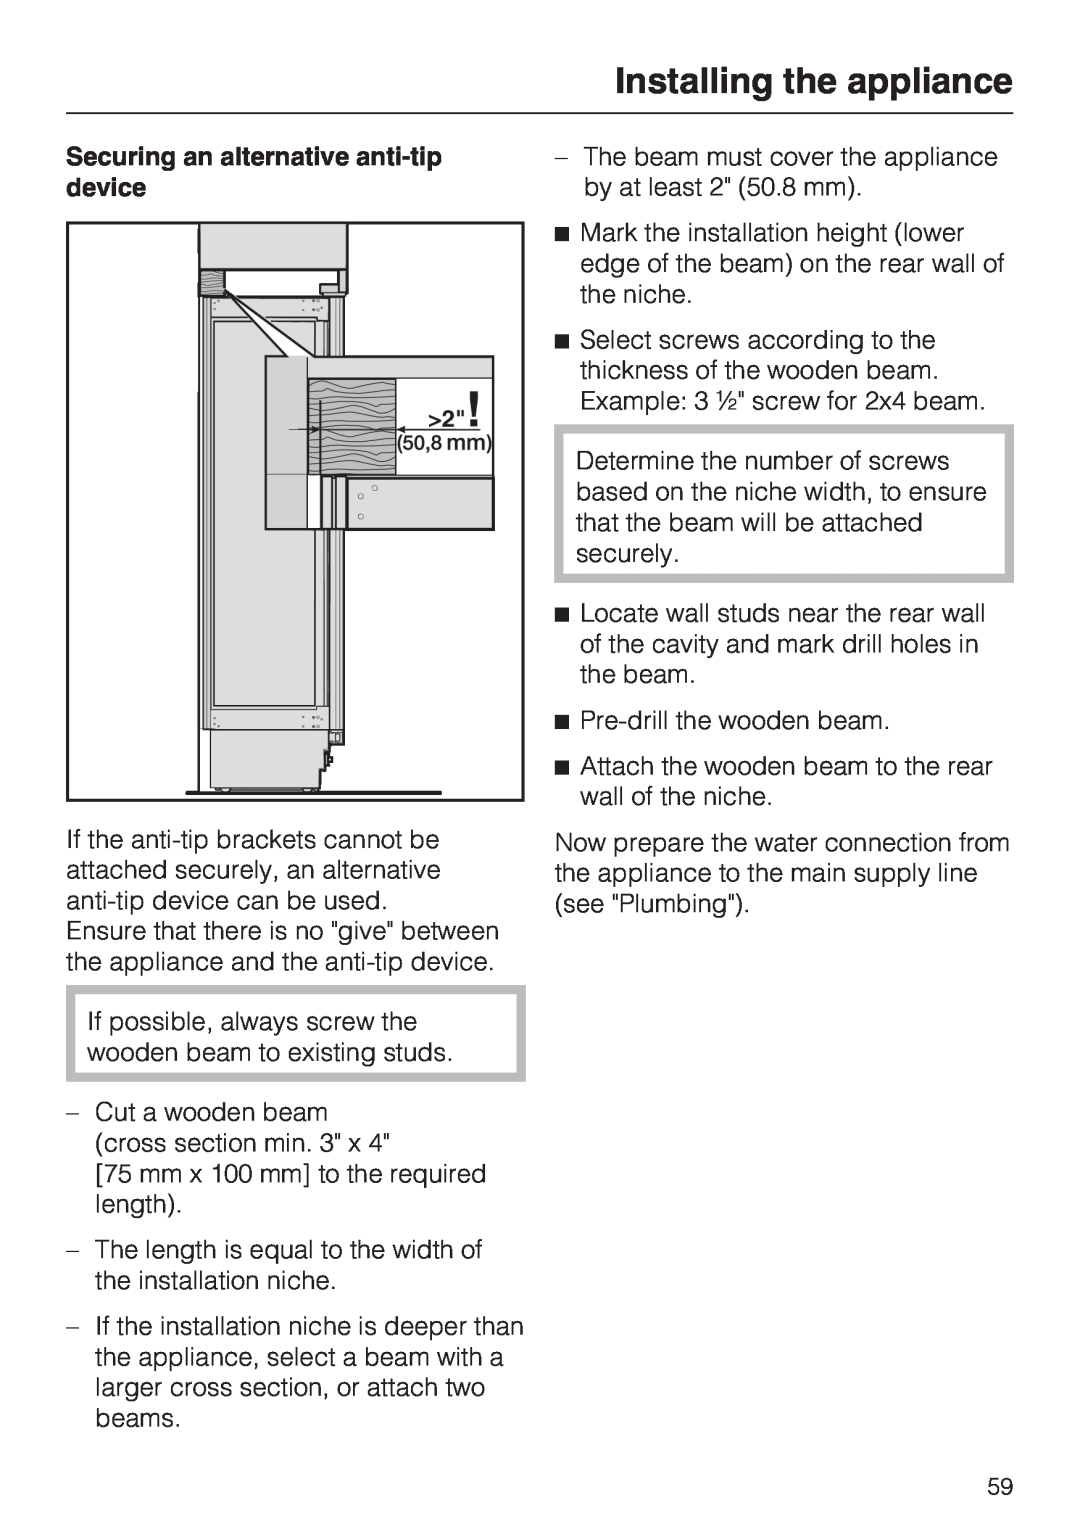 Miele F 1411 SF installation instructions Installing the appliance, Securing an alternative anti-tipdevice 